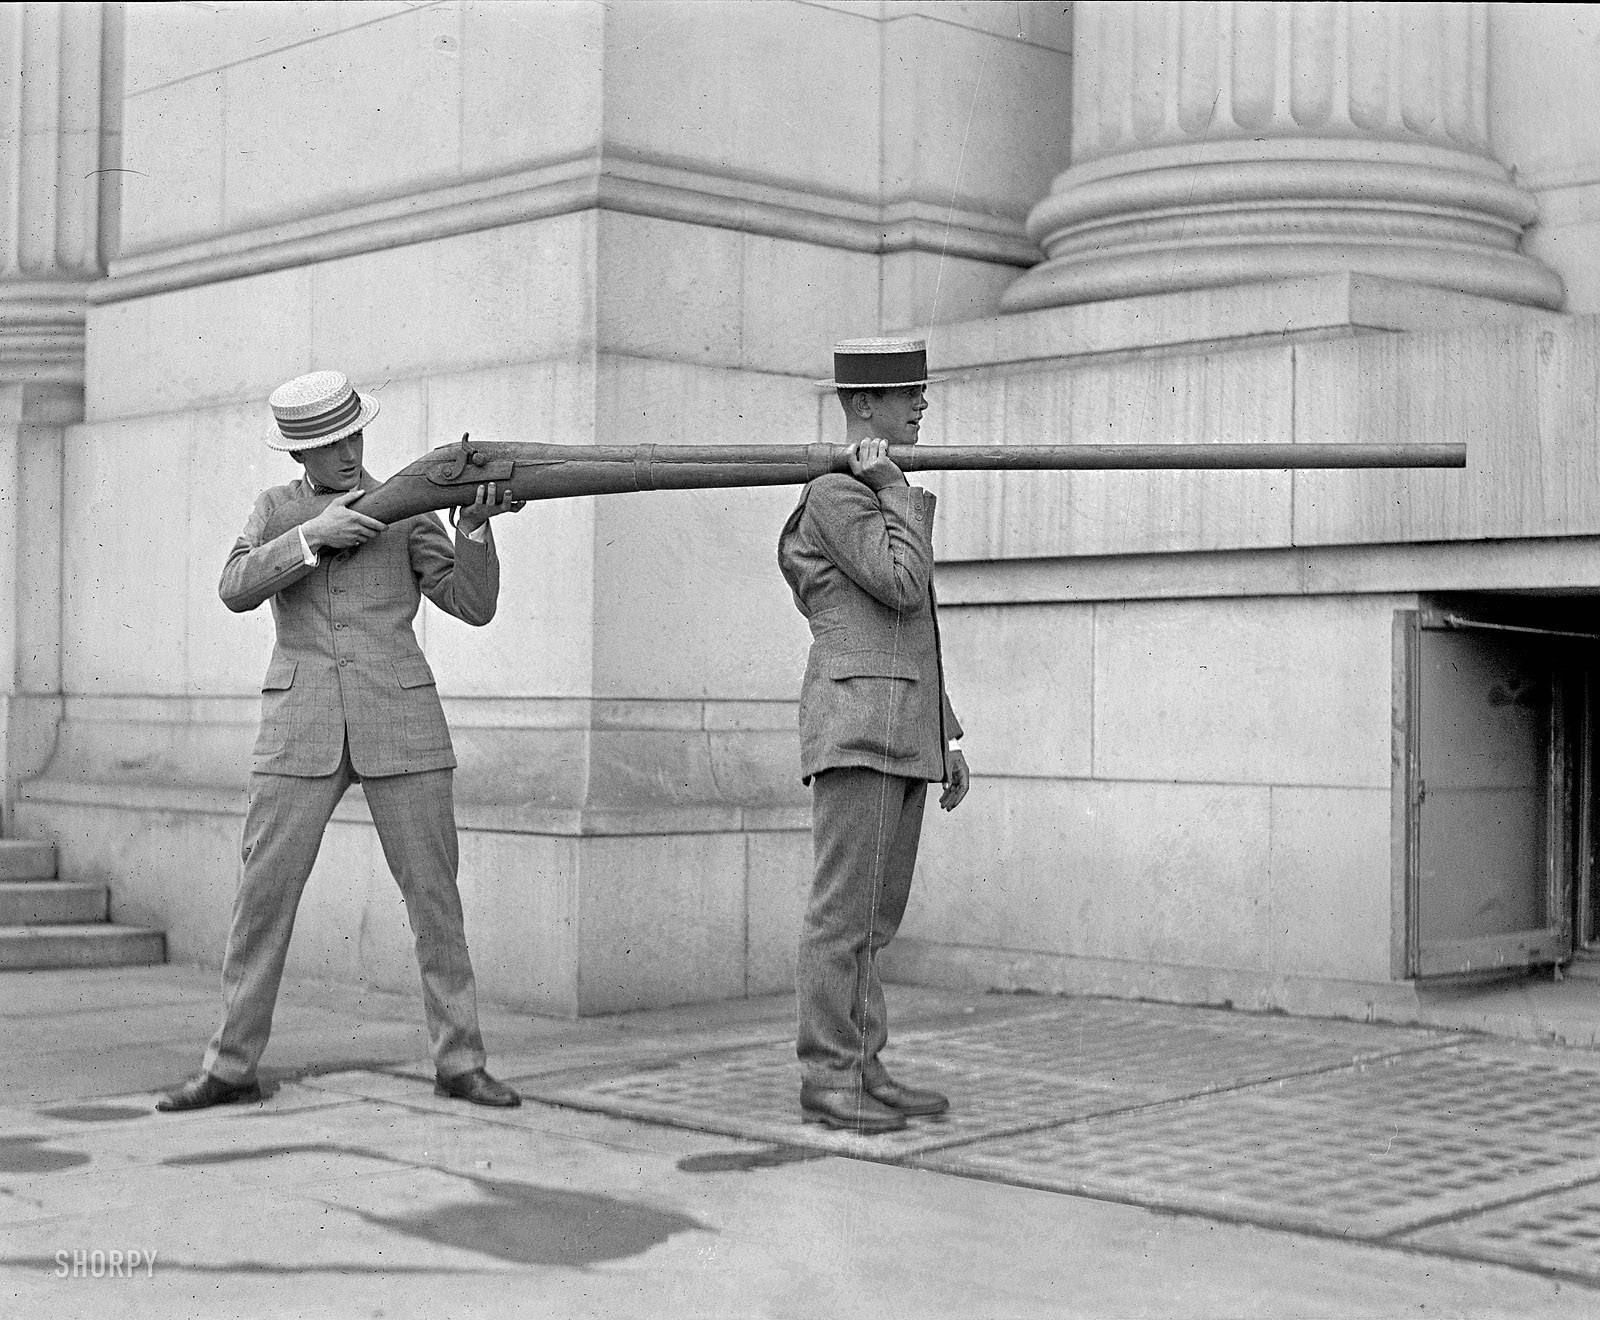 This absurdly long punt gun could discharge a pound of shot each time it was fired.